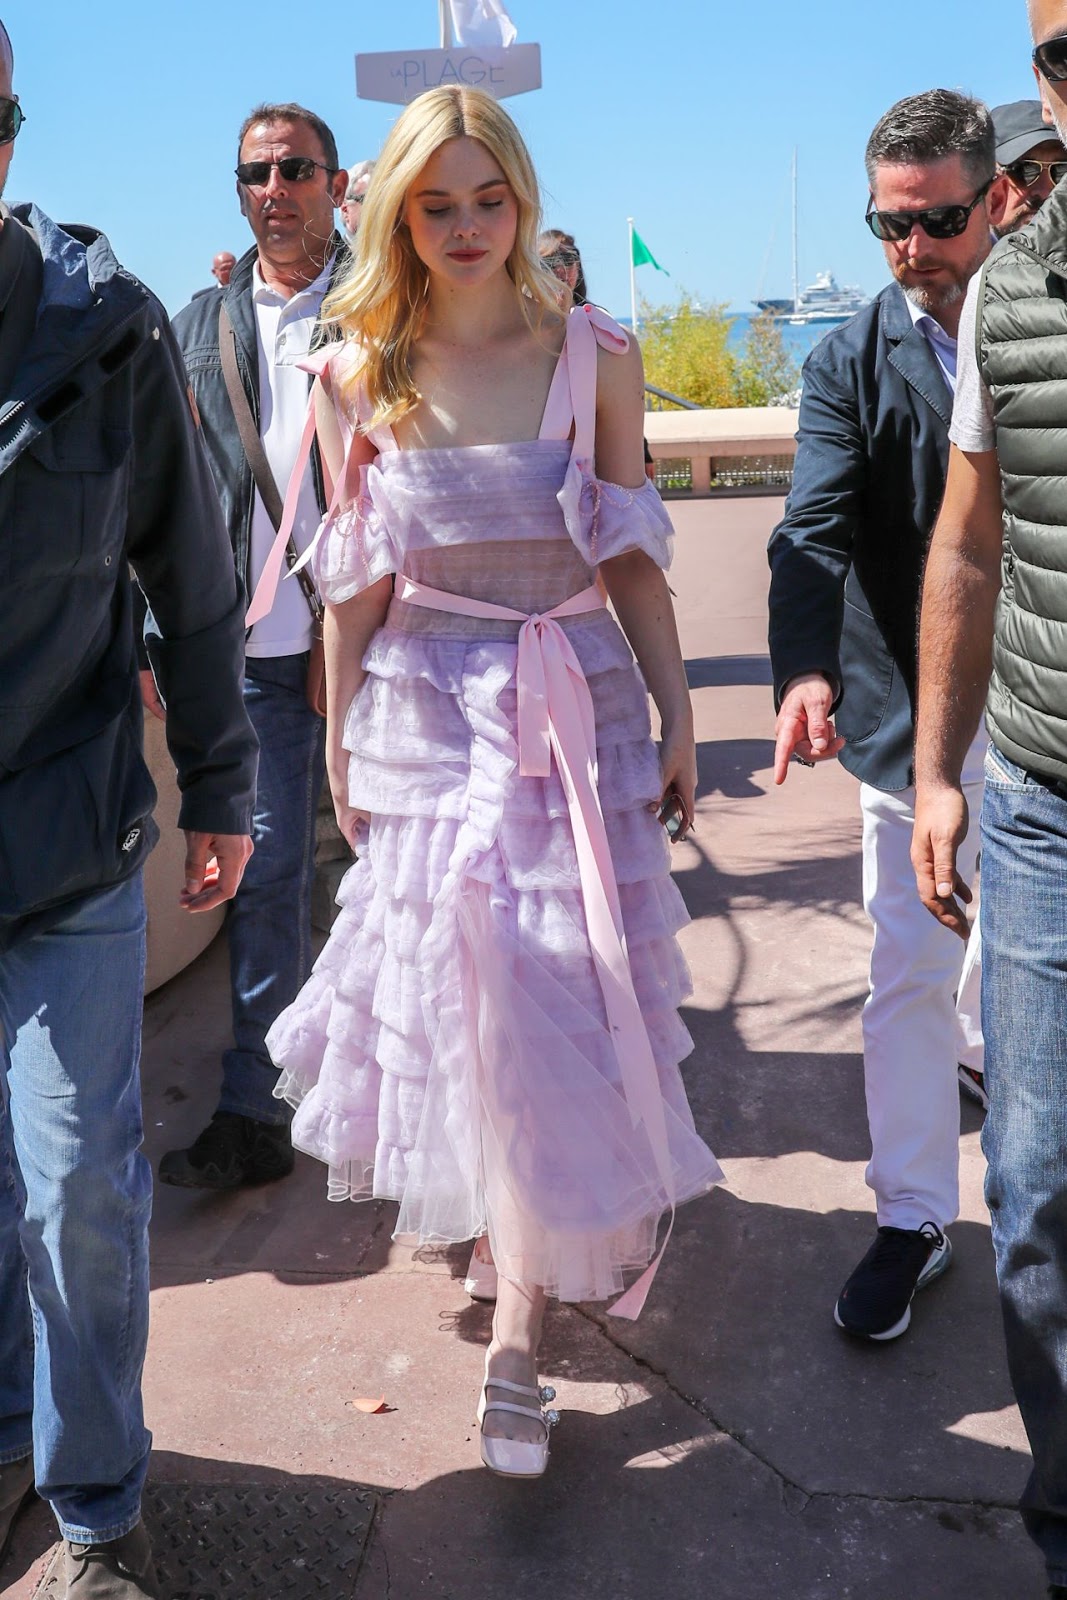 elle-fanning-at-the-martinez-hotel-in-cannes-05-14-2019-2.jpg